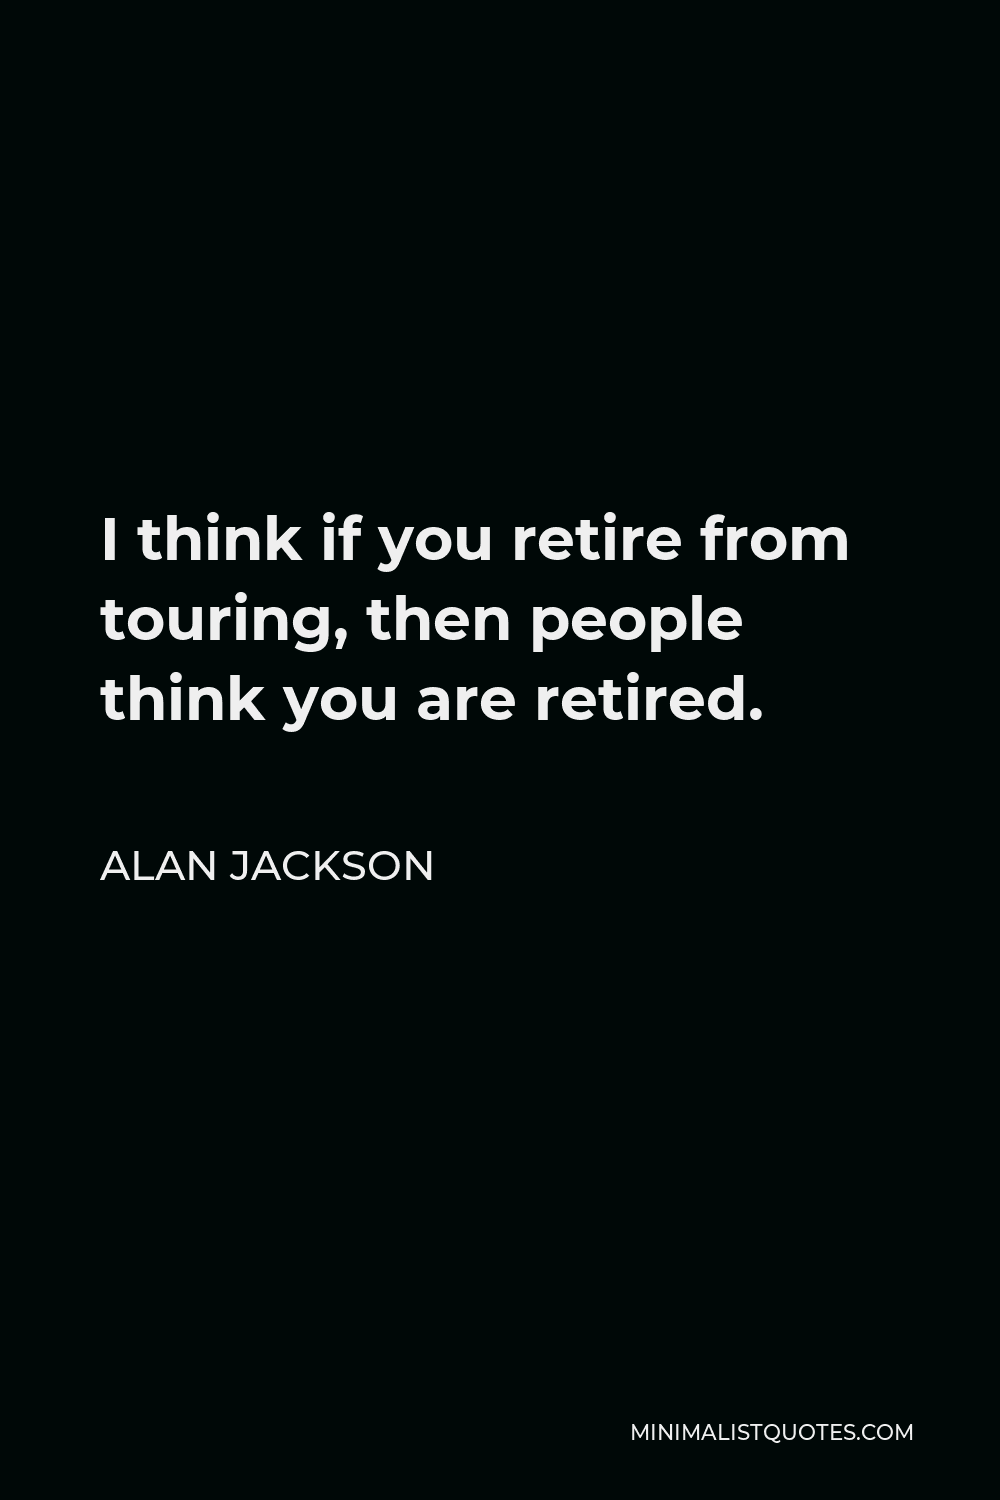 Alan Jackson Quote - I think if you retire from touring, then people think you are retired.